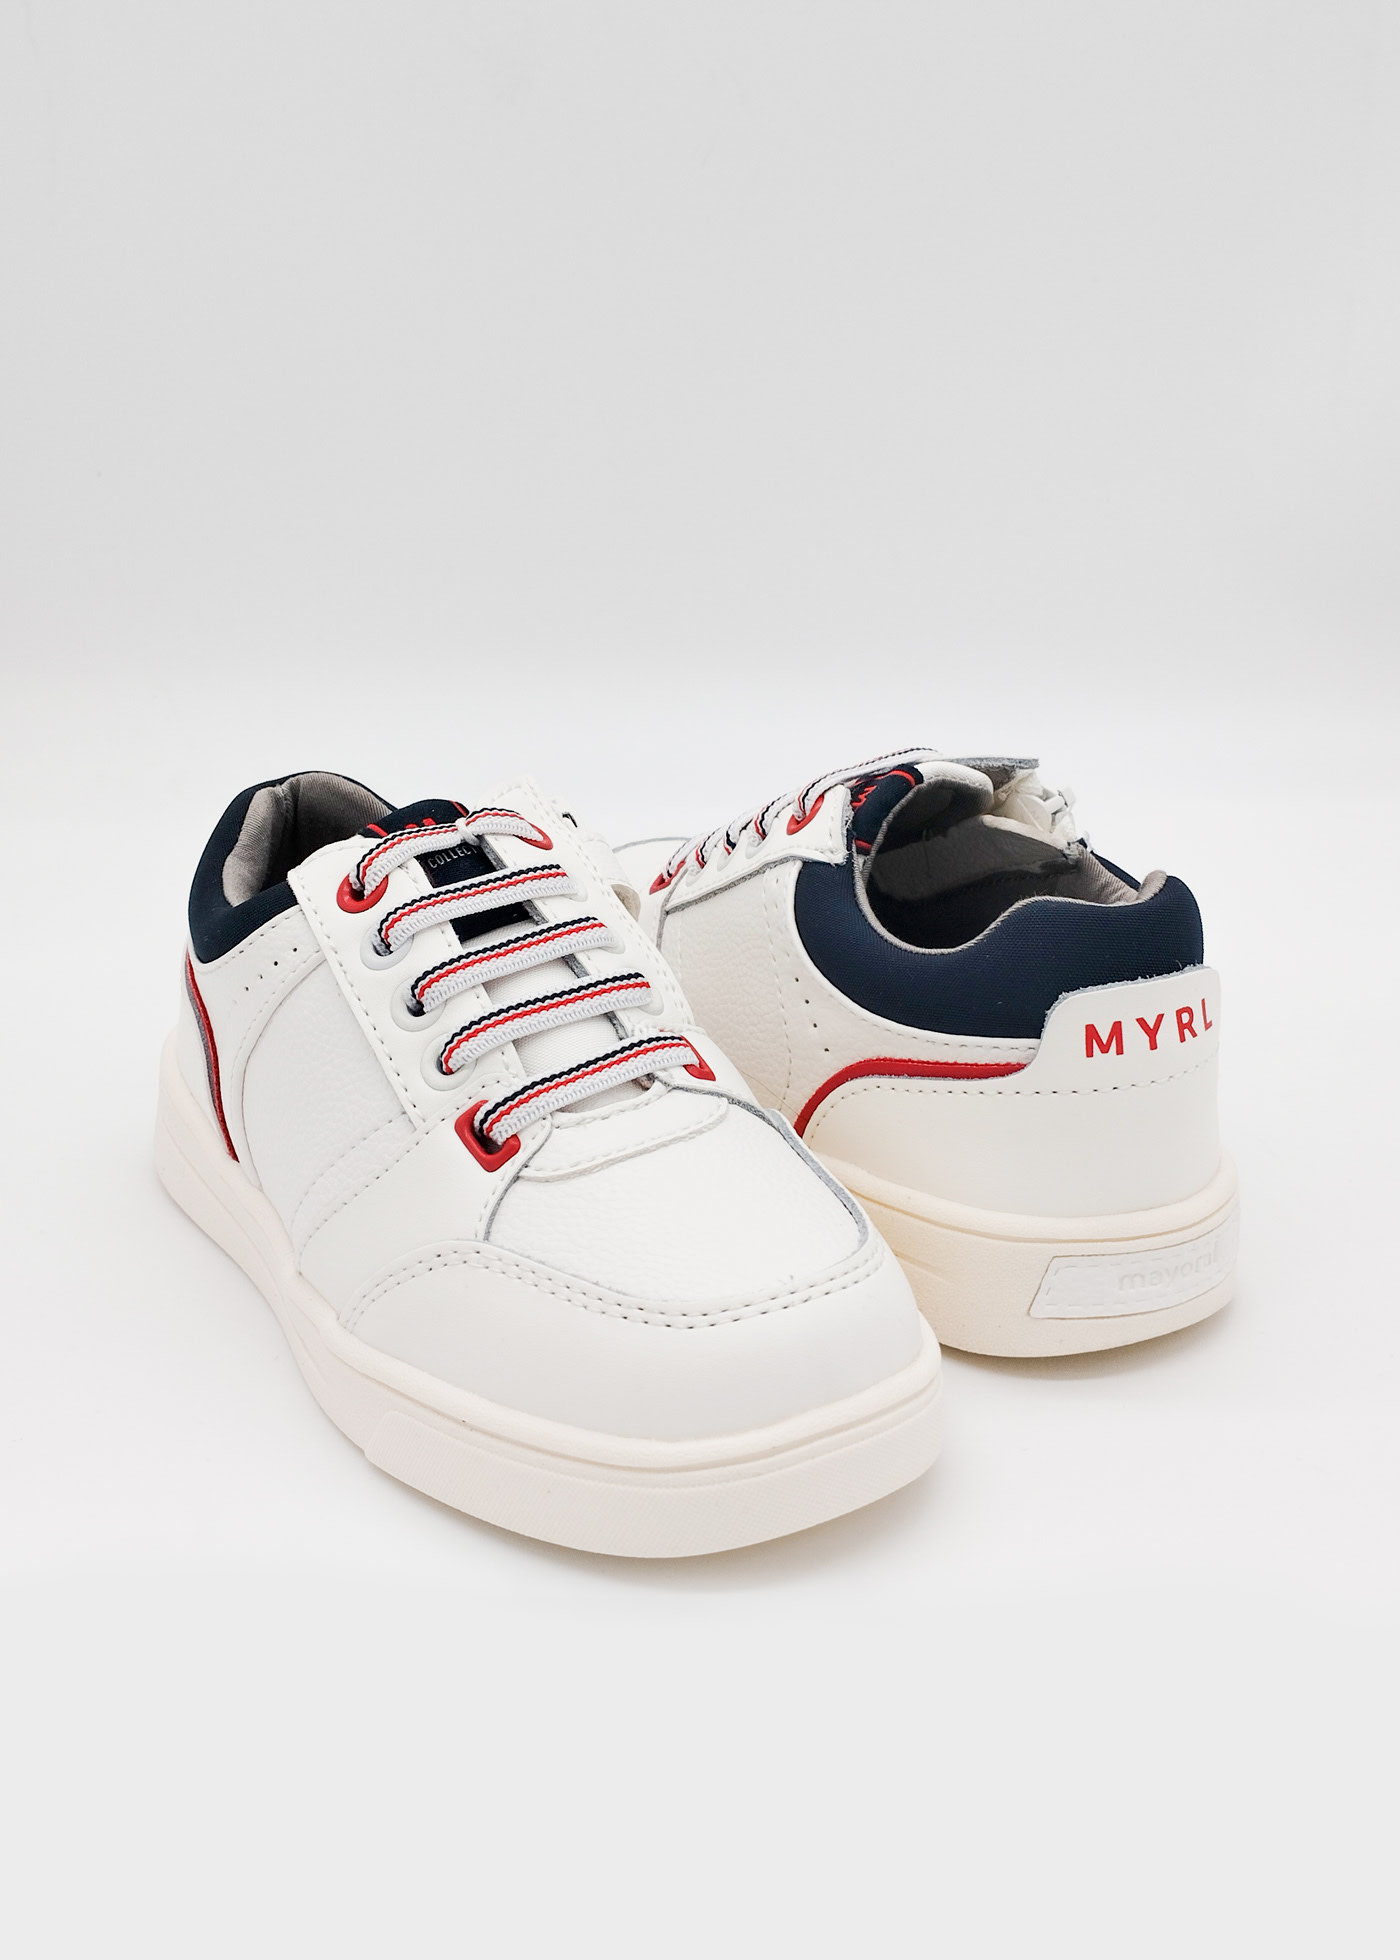 Boy Trainers Sustainable Leather